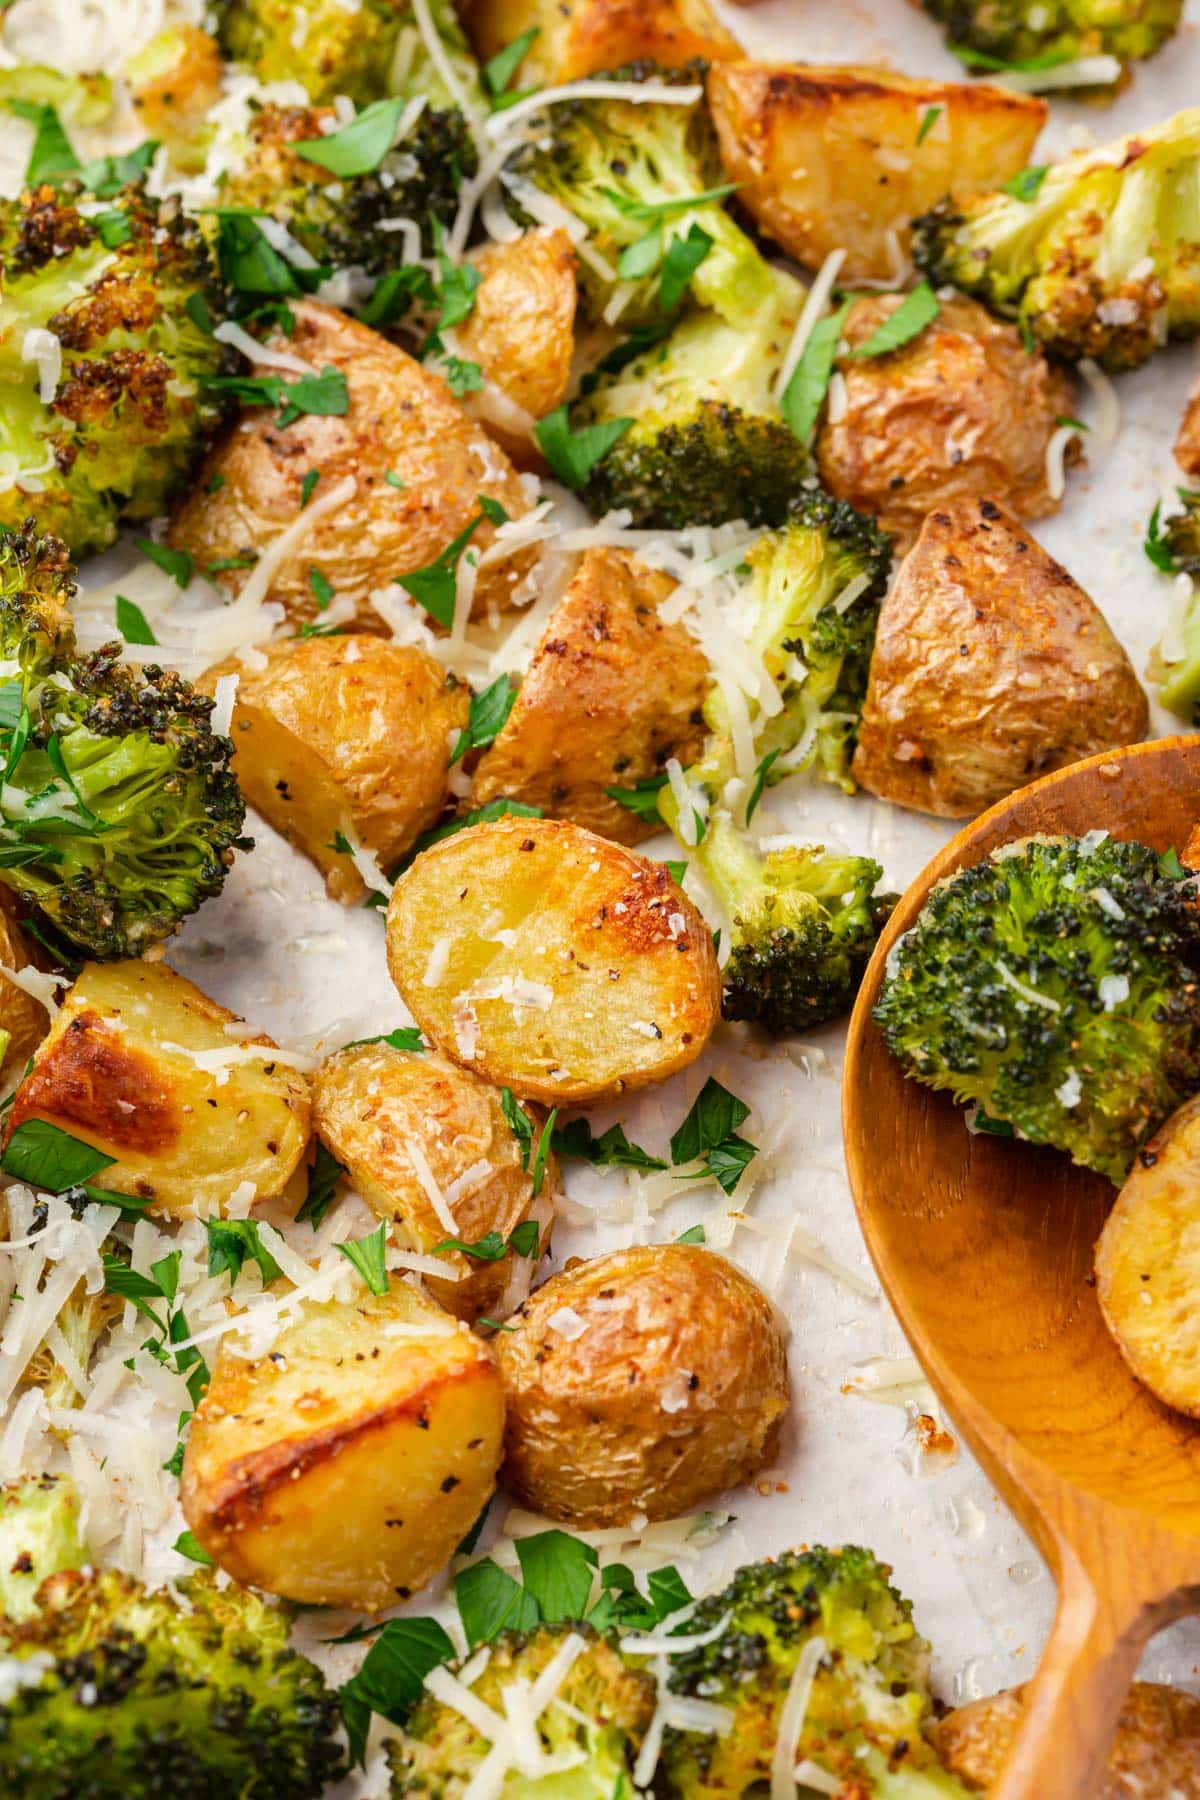 A closeup of roasted broccoli and potatoes topped with spices, shredded parmesan cheese, and parsley with a wooden serving spoon.